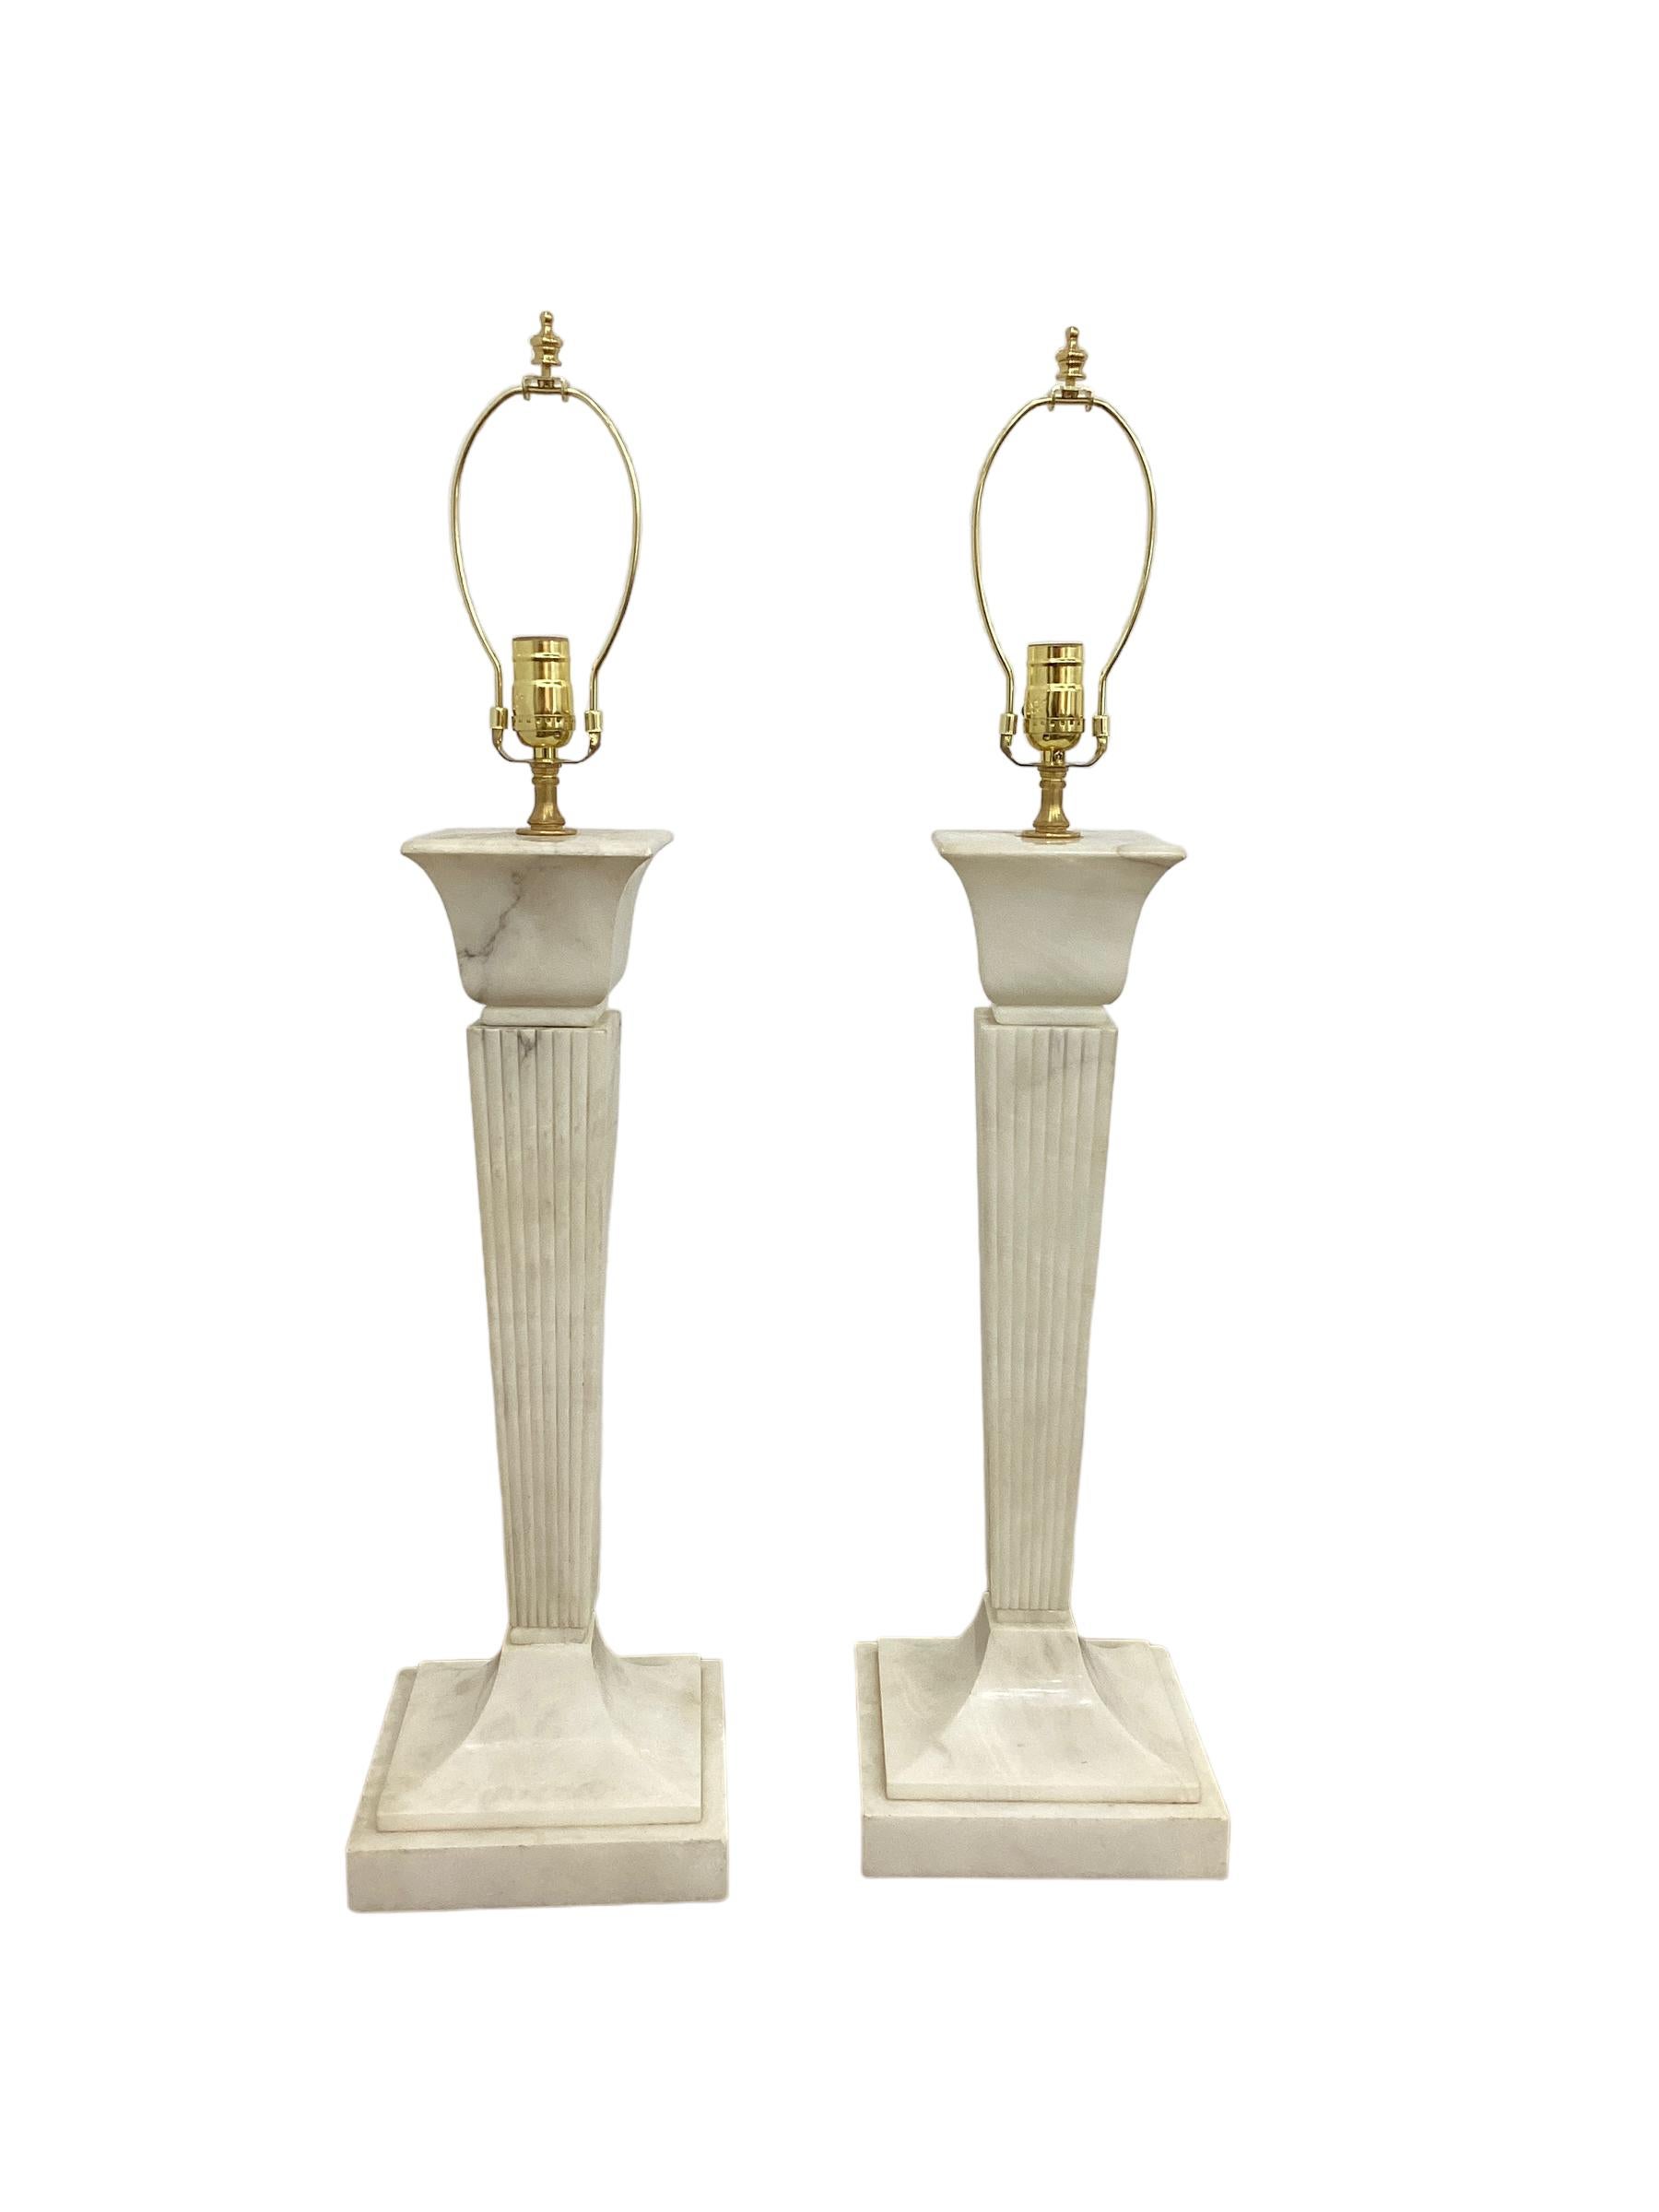 A Pair of Large Art Deco Alabaster Lamps with tapering reeded columns. These lamps are quite impressive and stately in presence. They measure 24” to the top of the column and the base is 8.5”square. They have been newly wired and are in good working